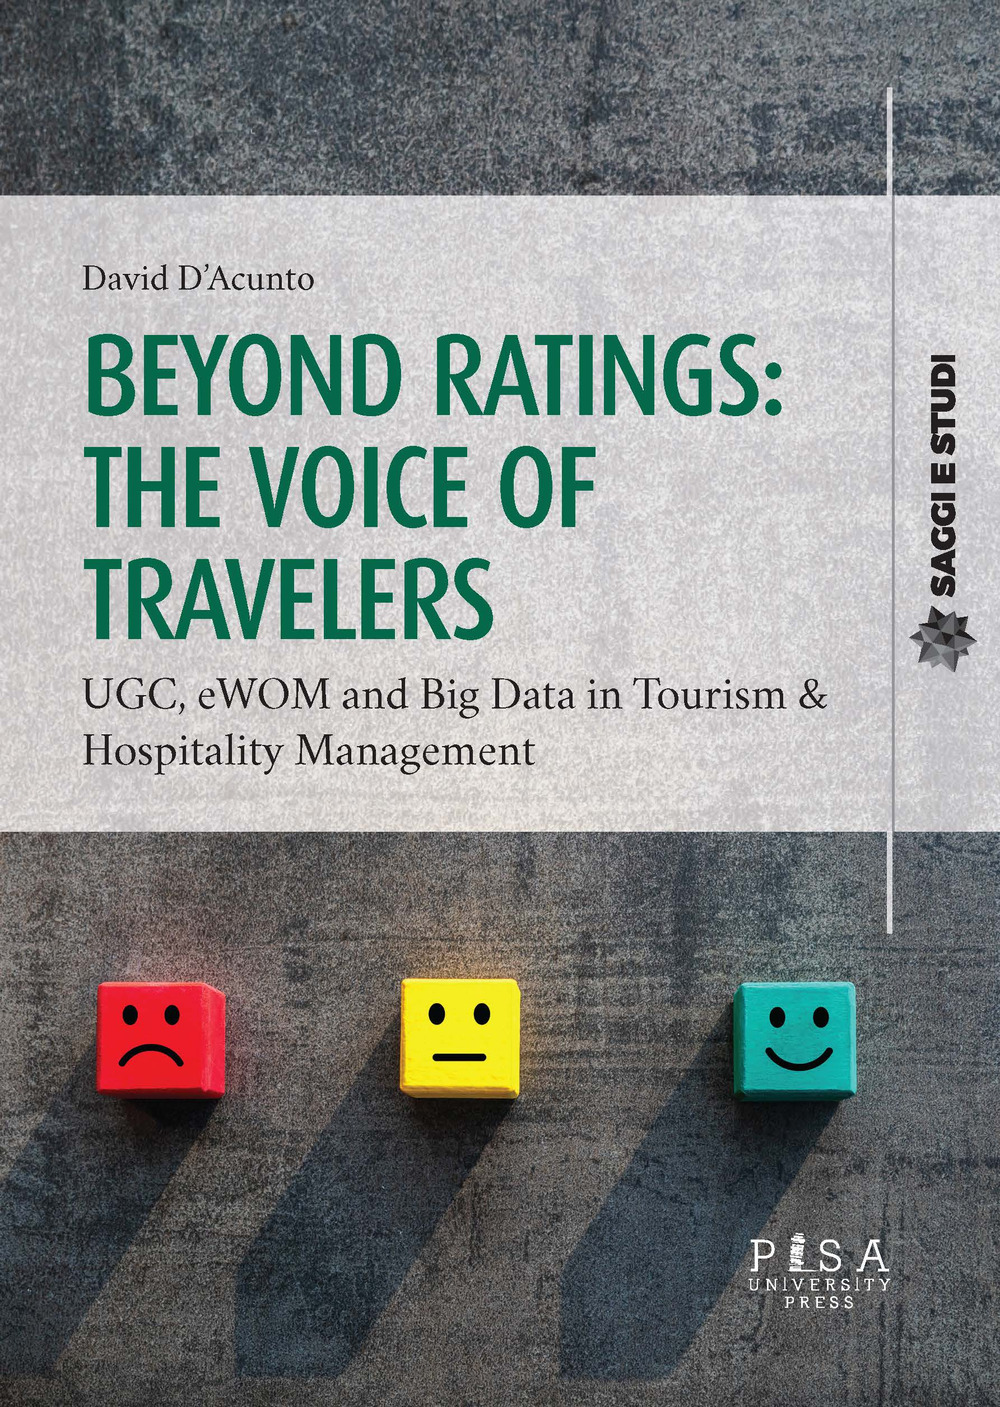 Image of Beyond ratings: the voice of travelers. UGC, eWon and big data in tourism & hospitality management